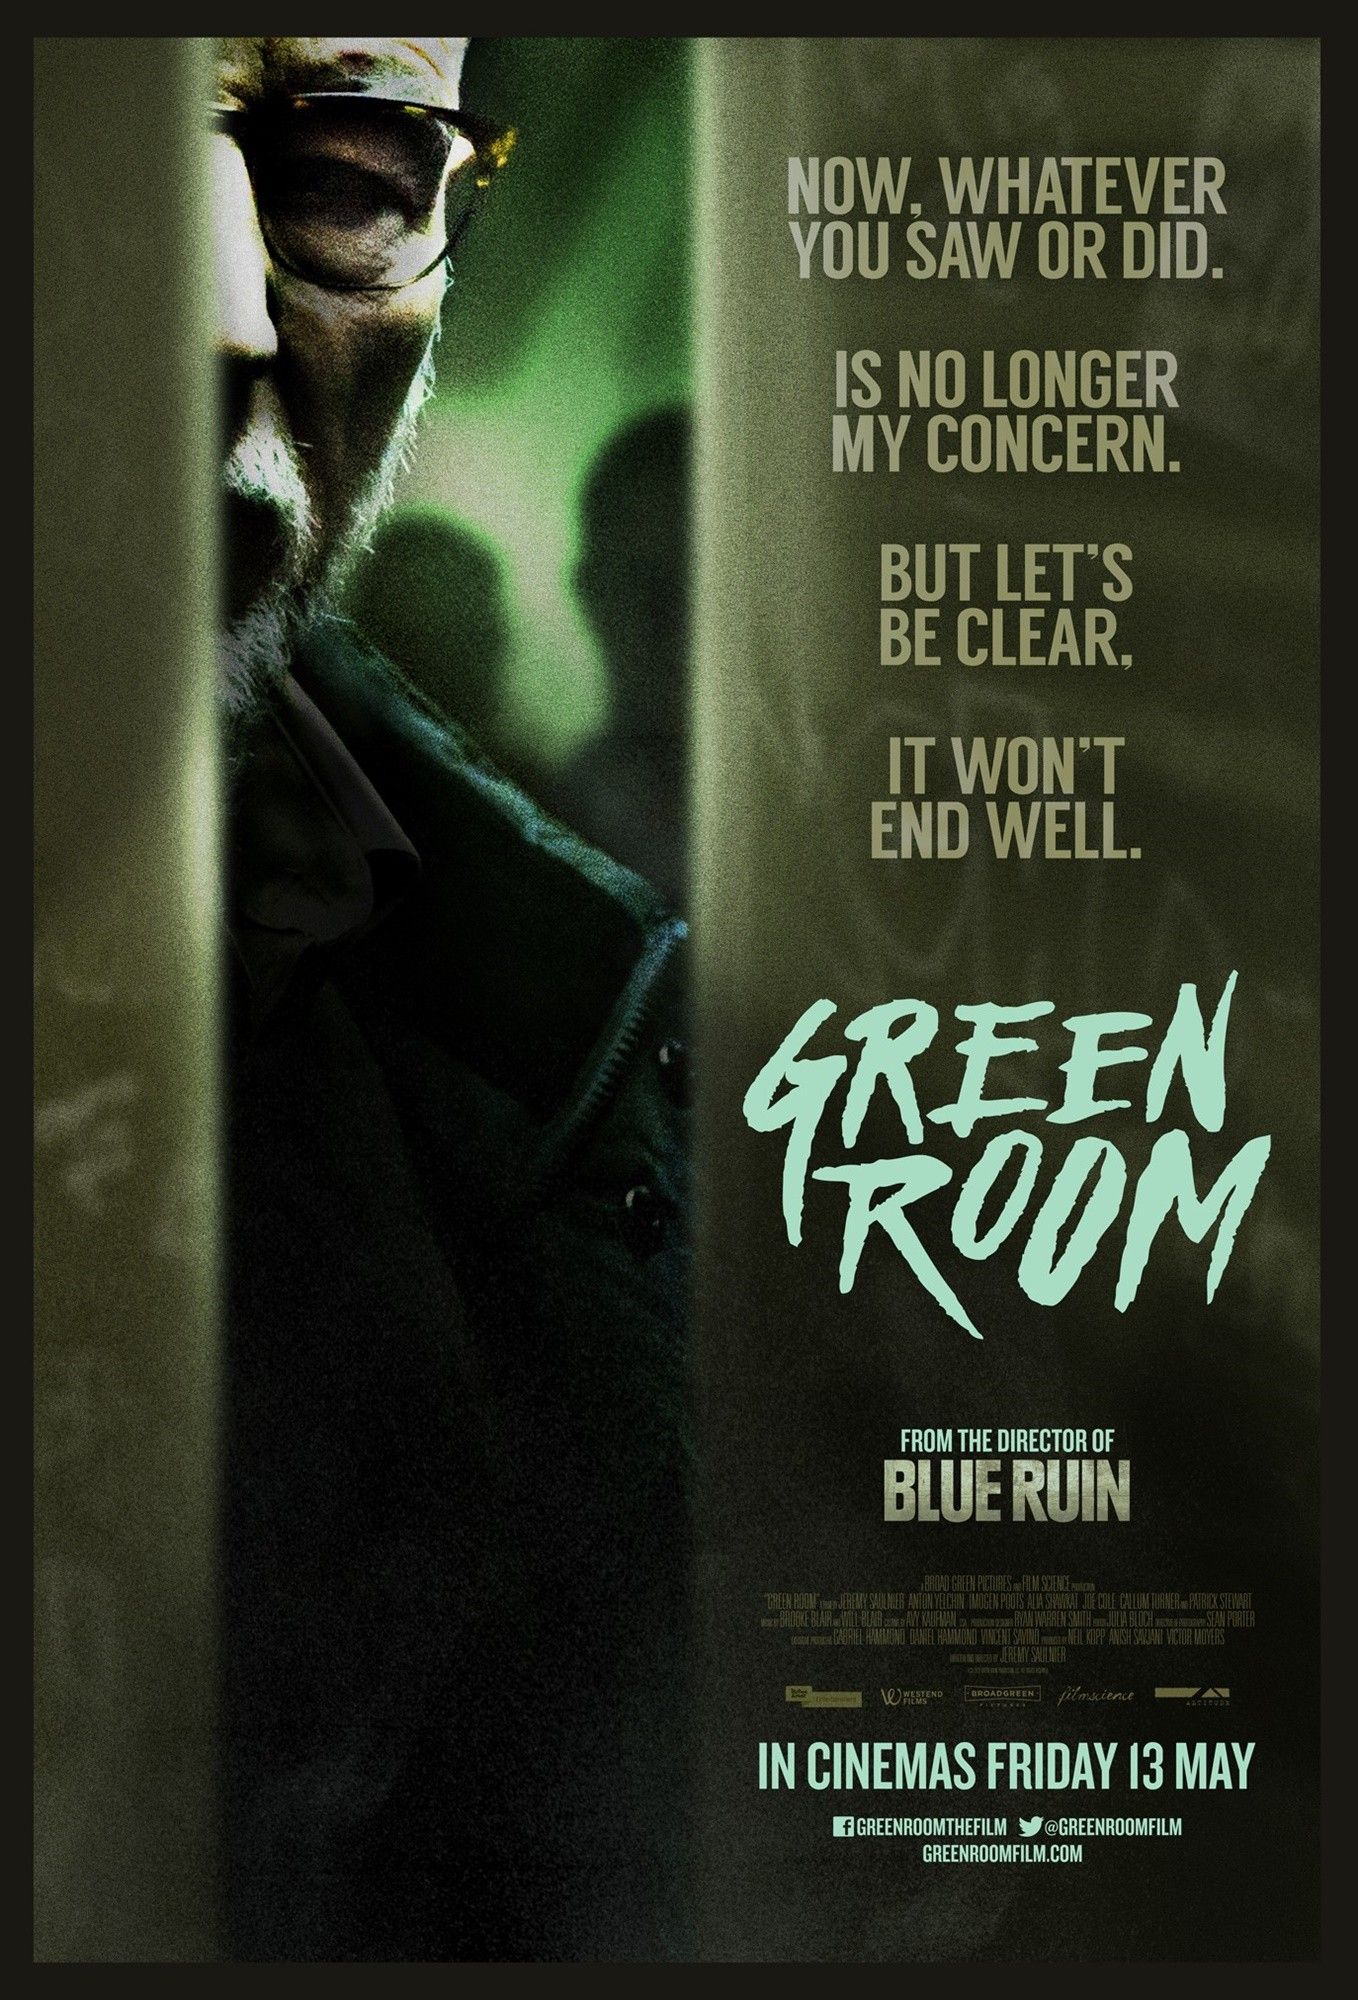 Poster of A24's Green Room (2016)